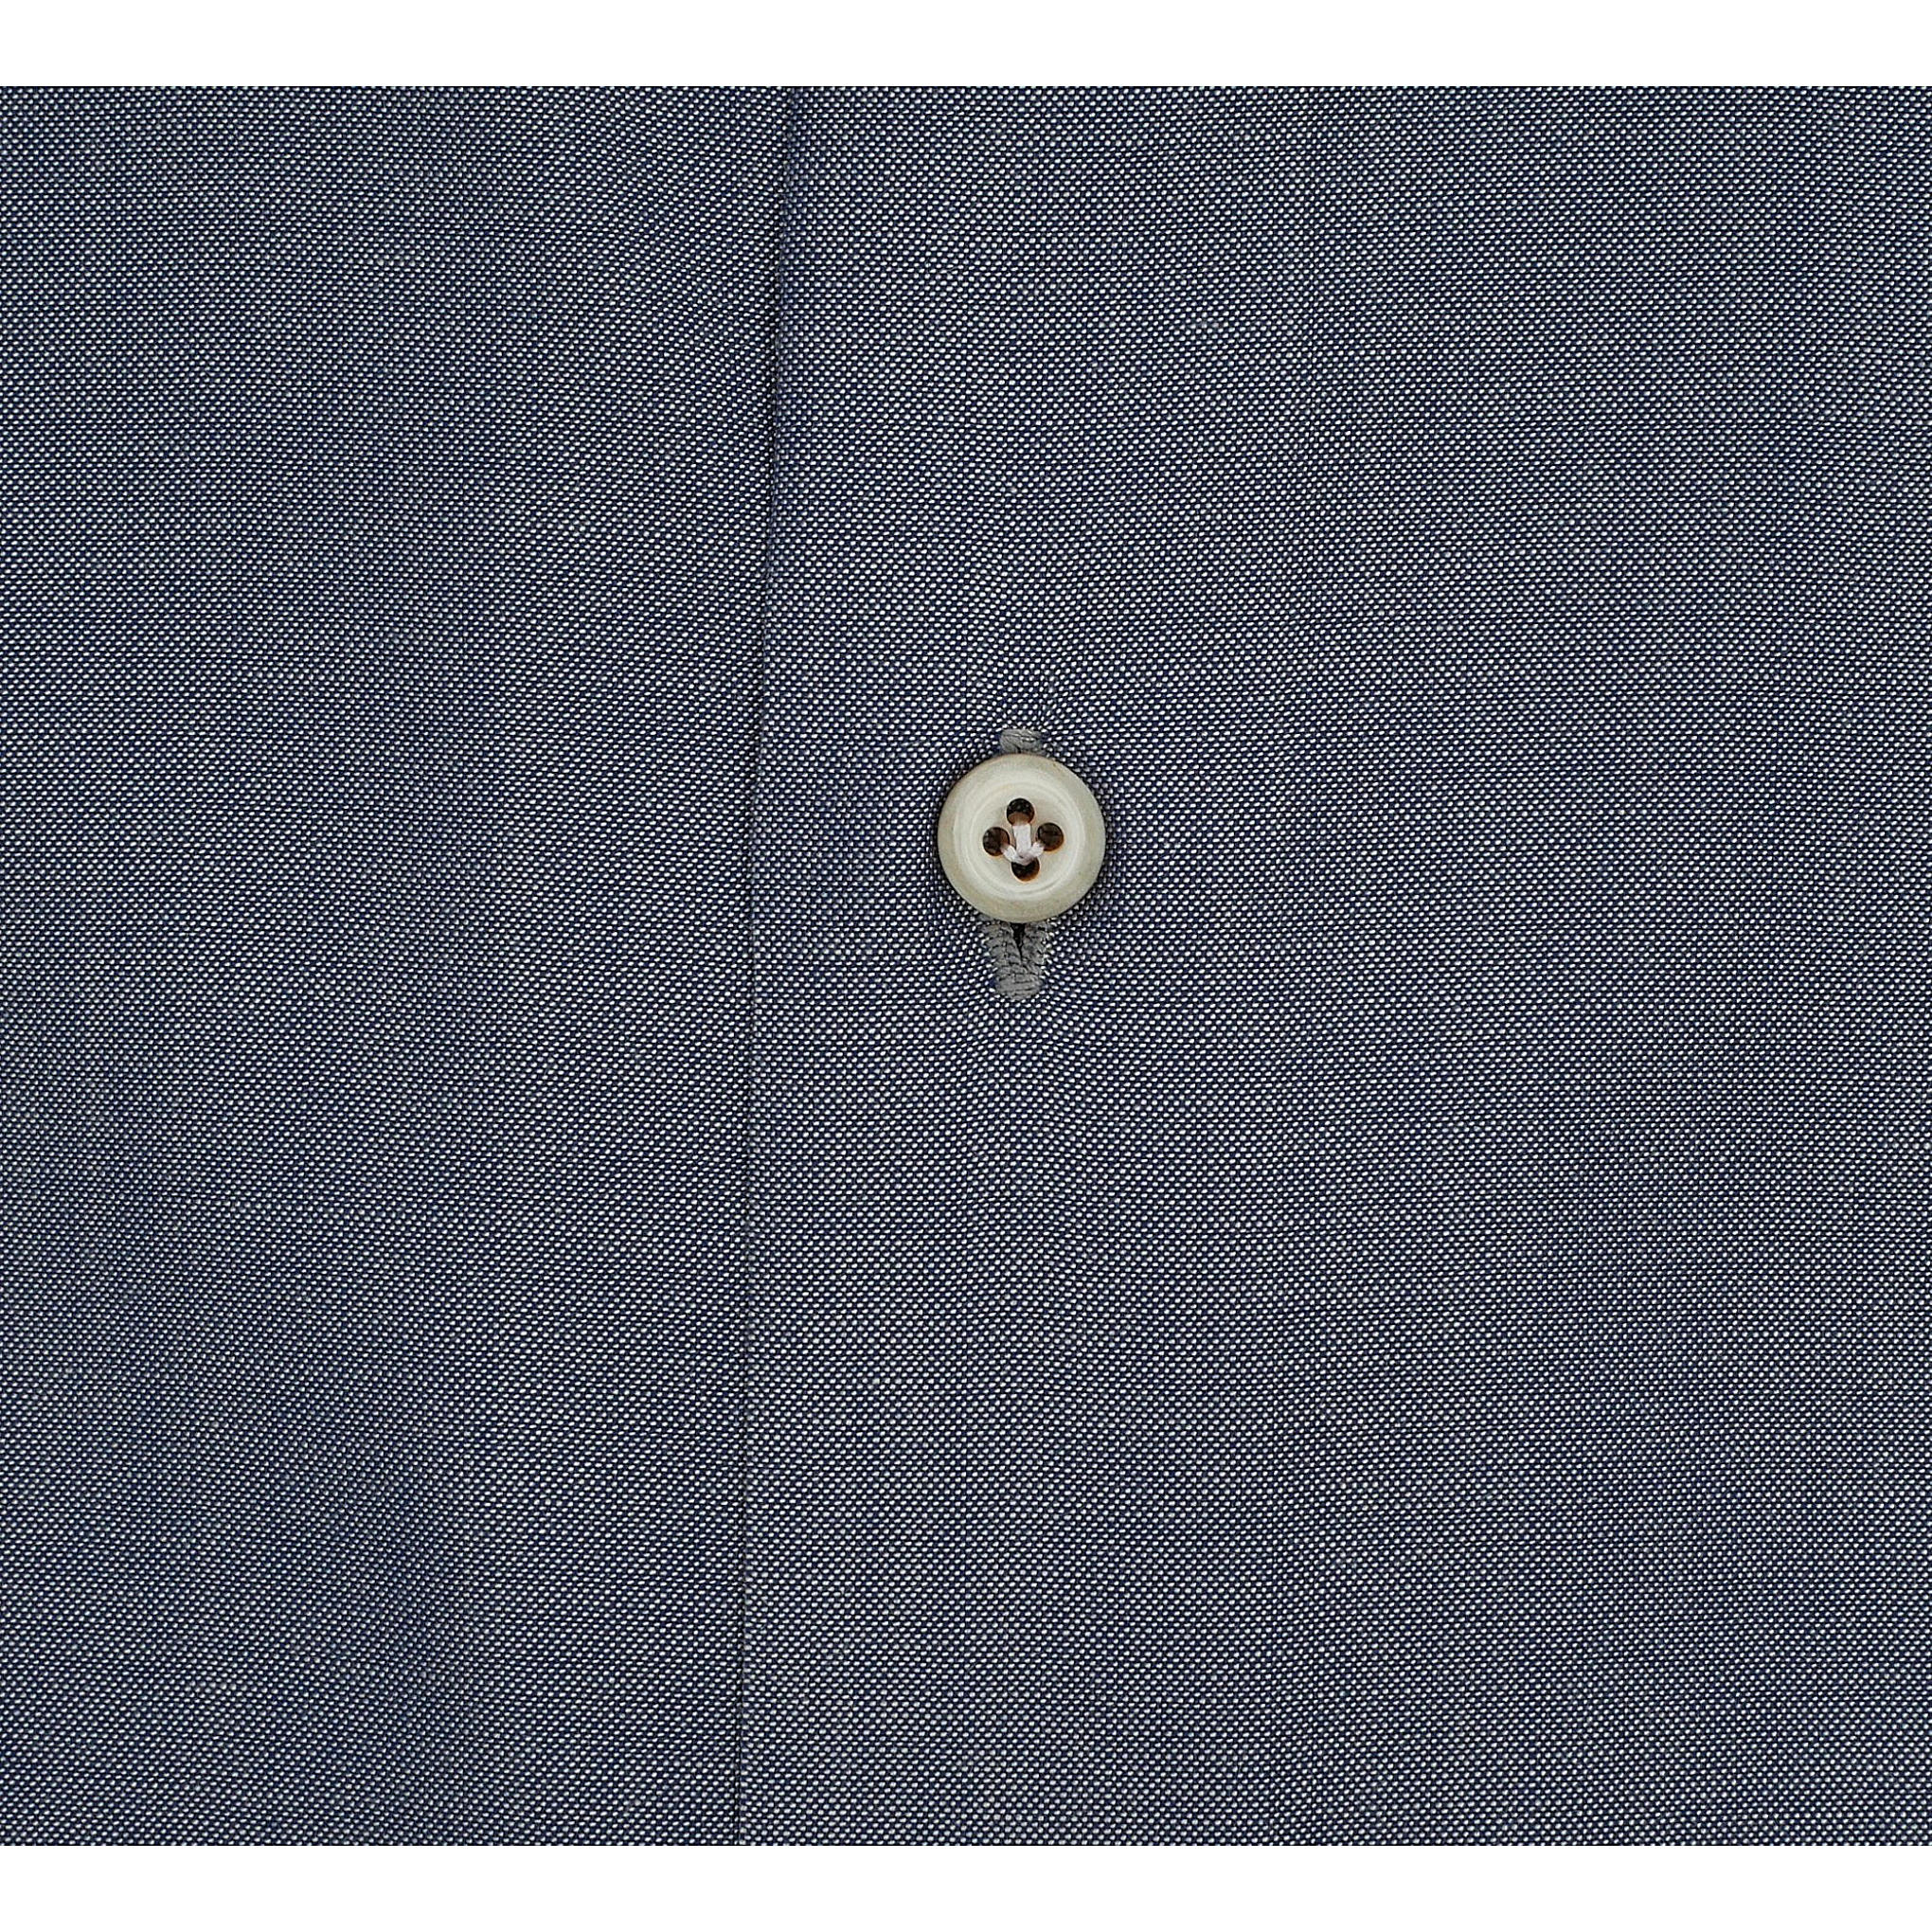 Napoli regular fit shirt plain fabric blue wool and cly